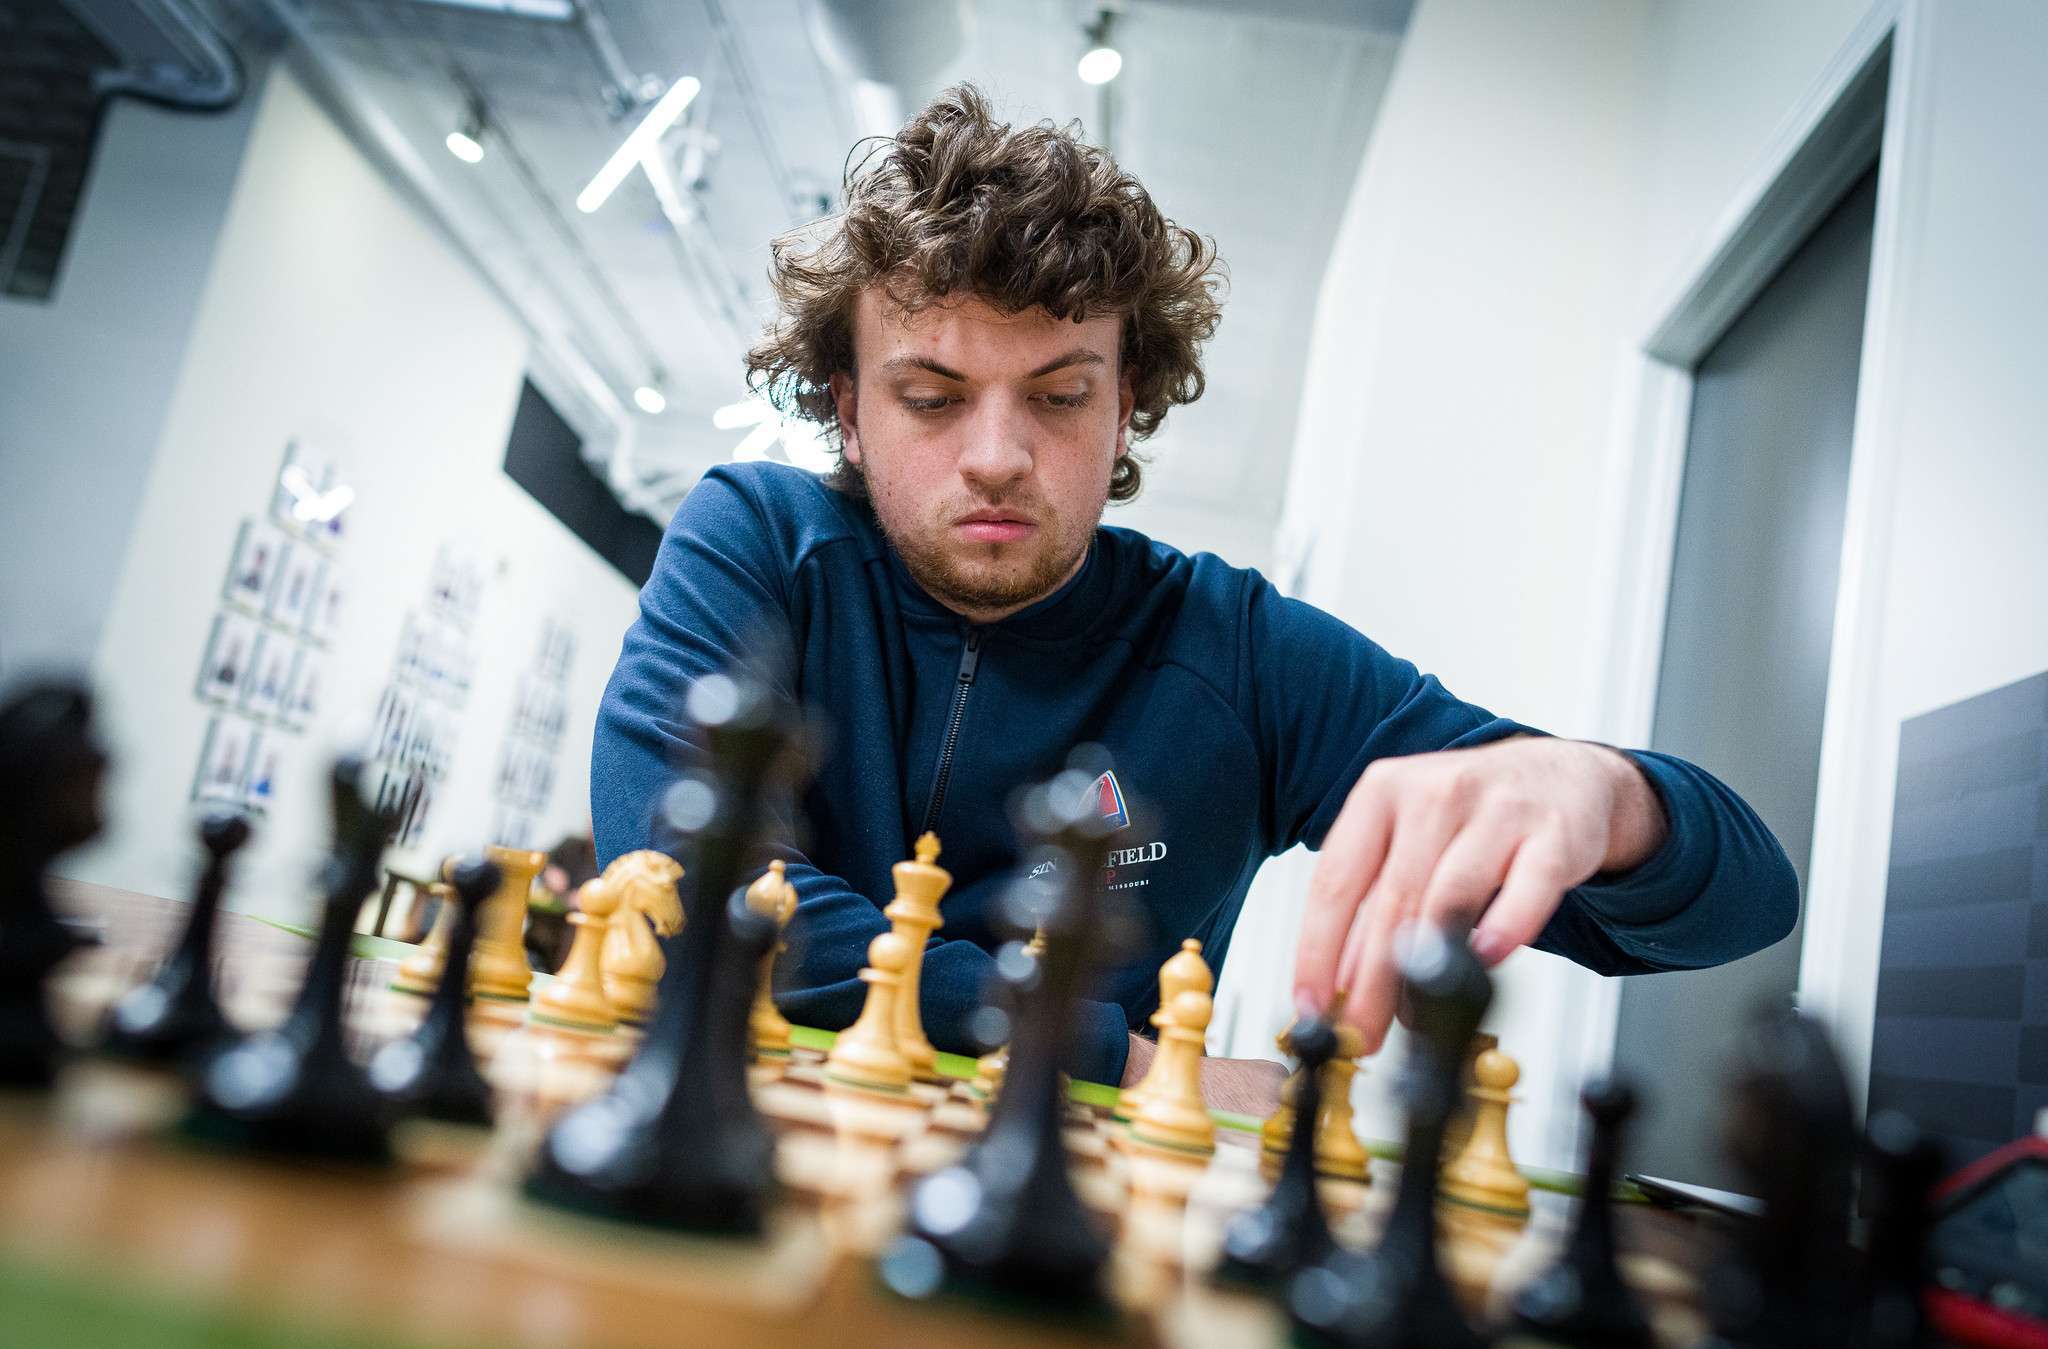 Hans Niemann passes Shankland in live ratings as the US #6 and reaches a  career high of #29 in the world at 2711.3 FIDE : r/chess